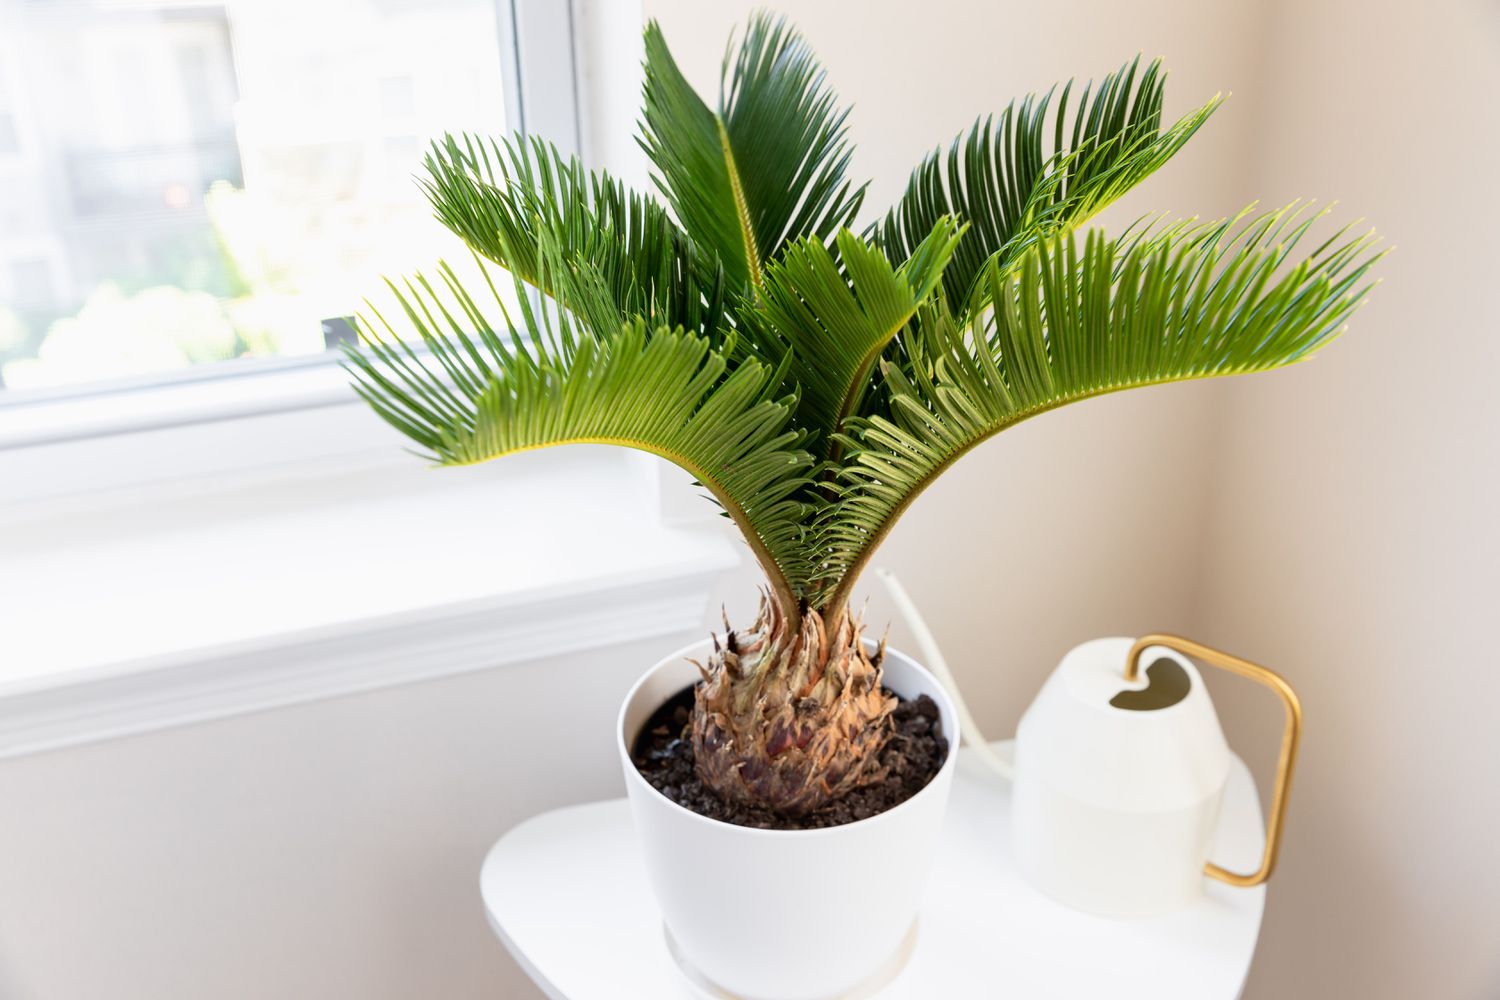 Sago palm in white pot with shaggy pineapple-like trunk and feather-like fronds next to white watering can and window